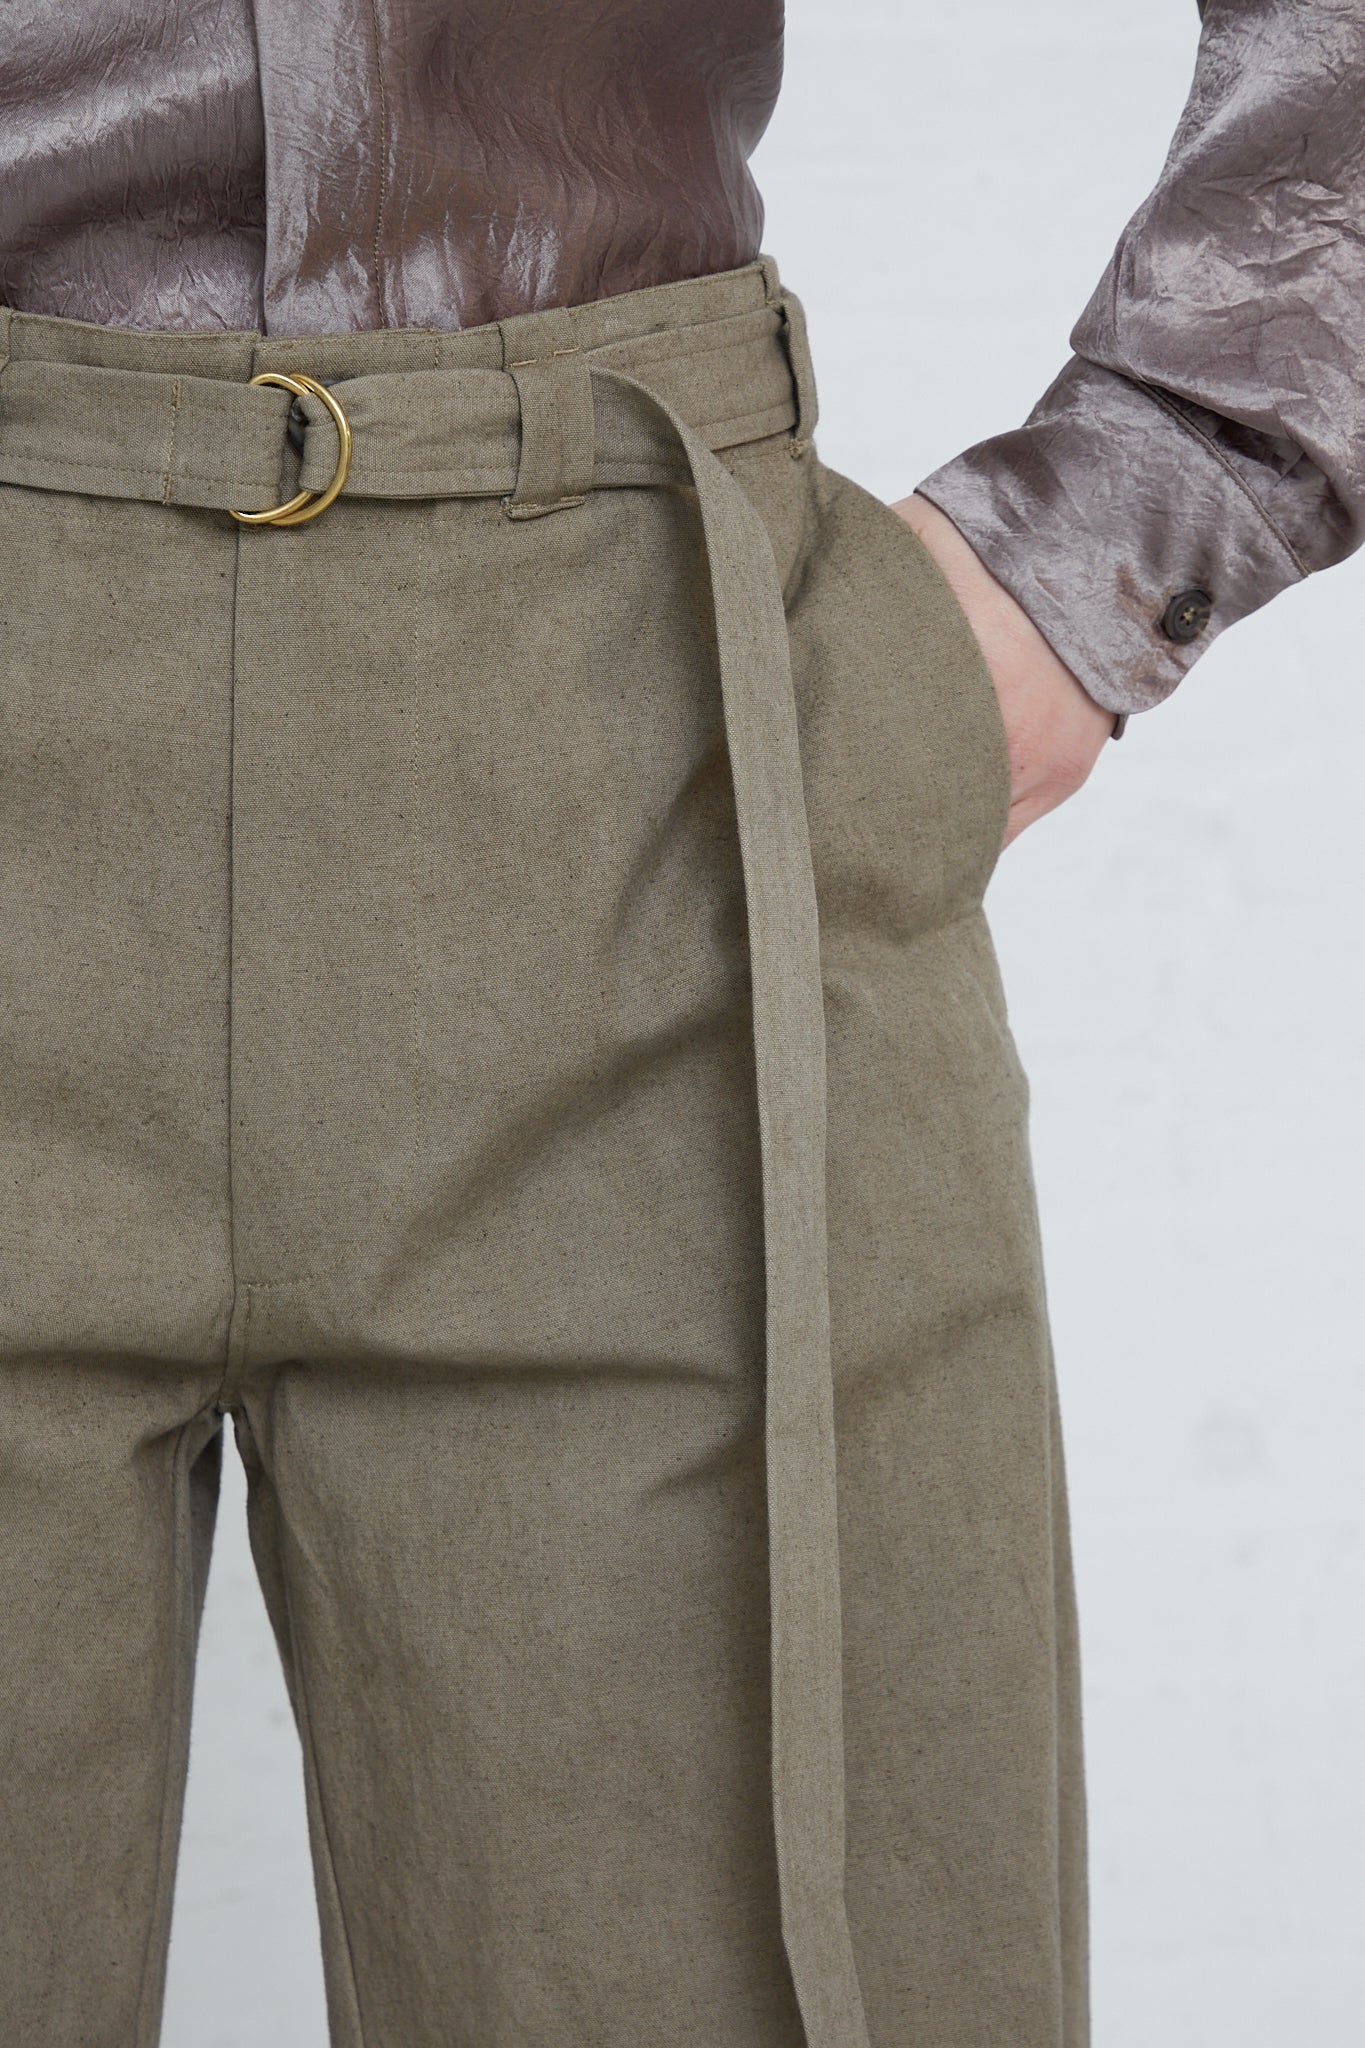 A woman wearing Lauren Manoogian's Belted Trouser in Fatigue pants.